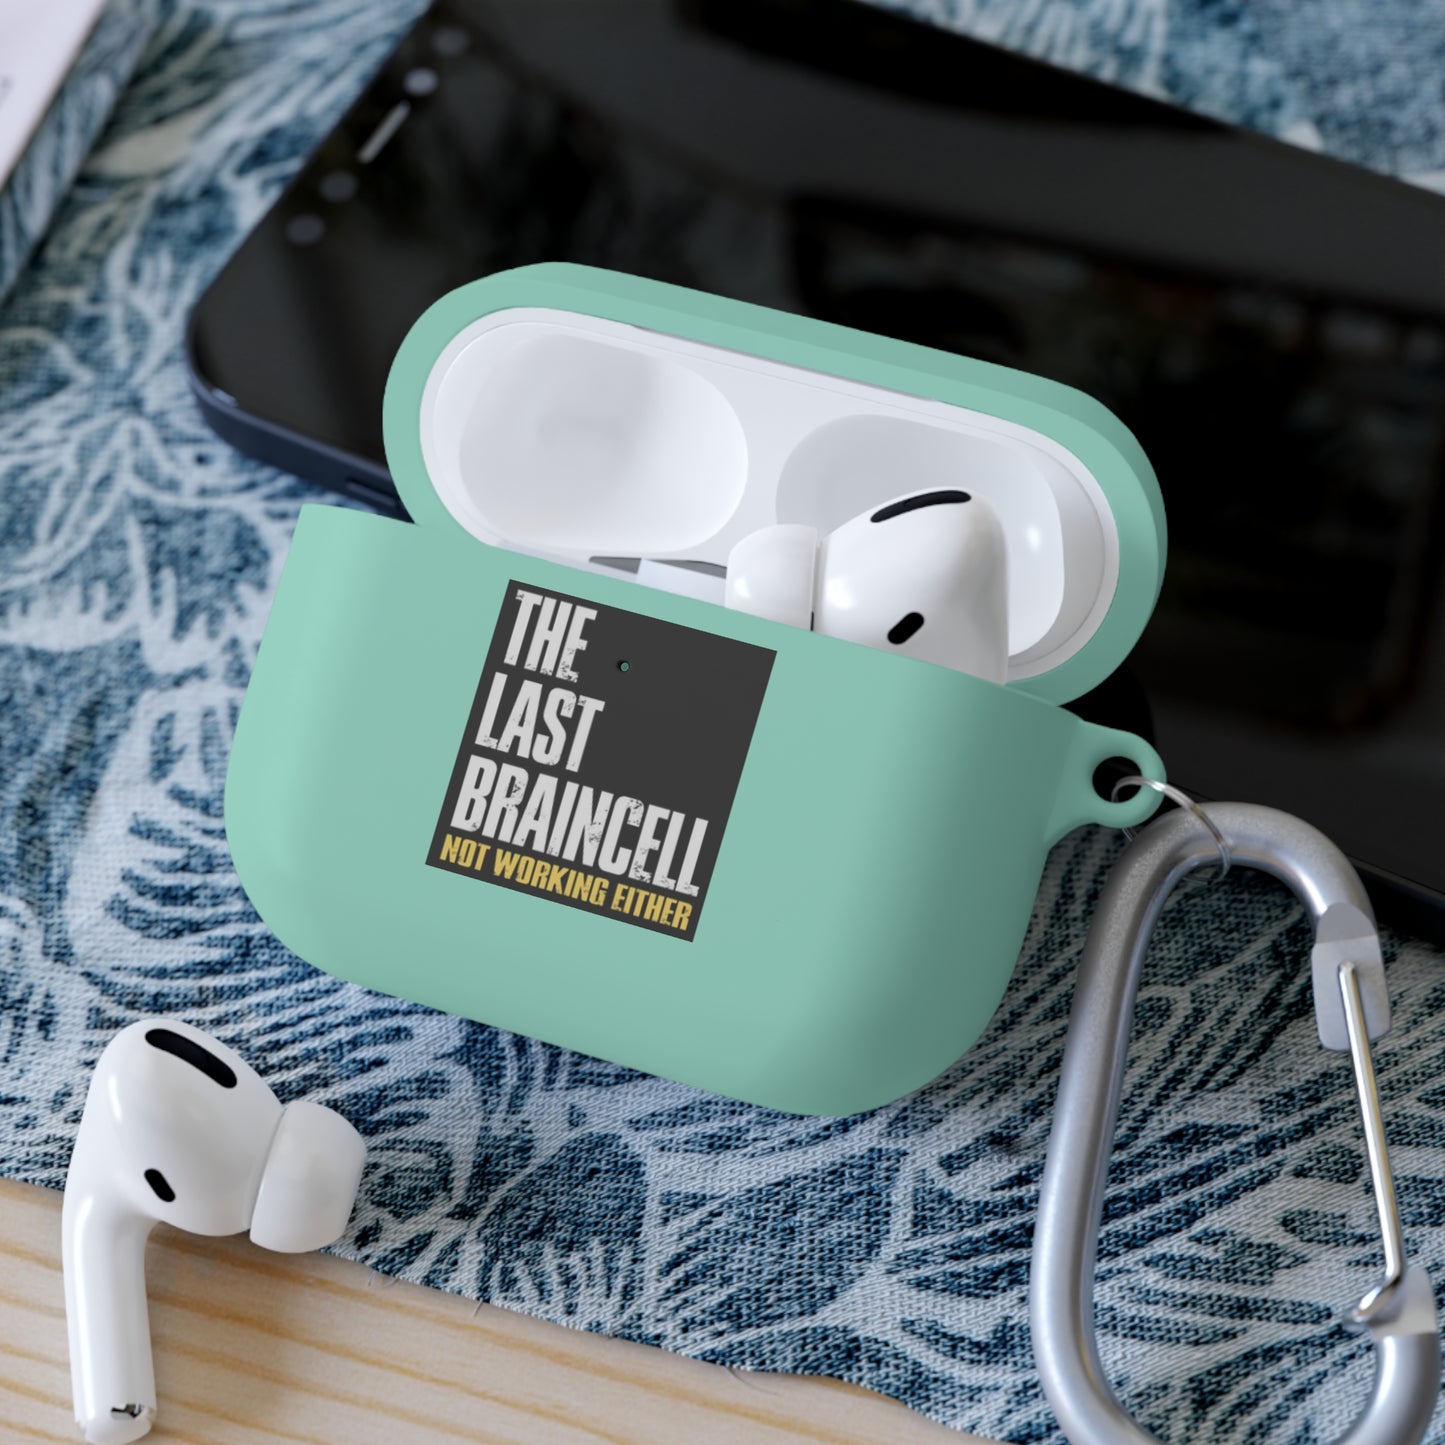 TLOU AirPods/AirPods Pro Case Cover- The Last Braincell